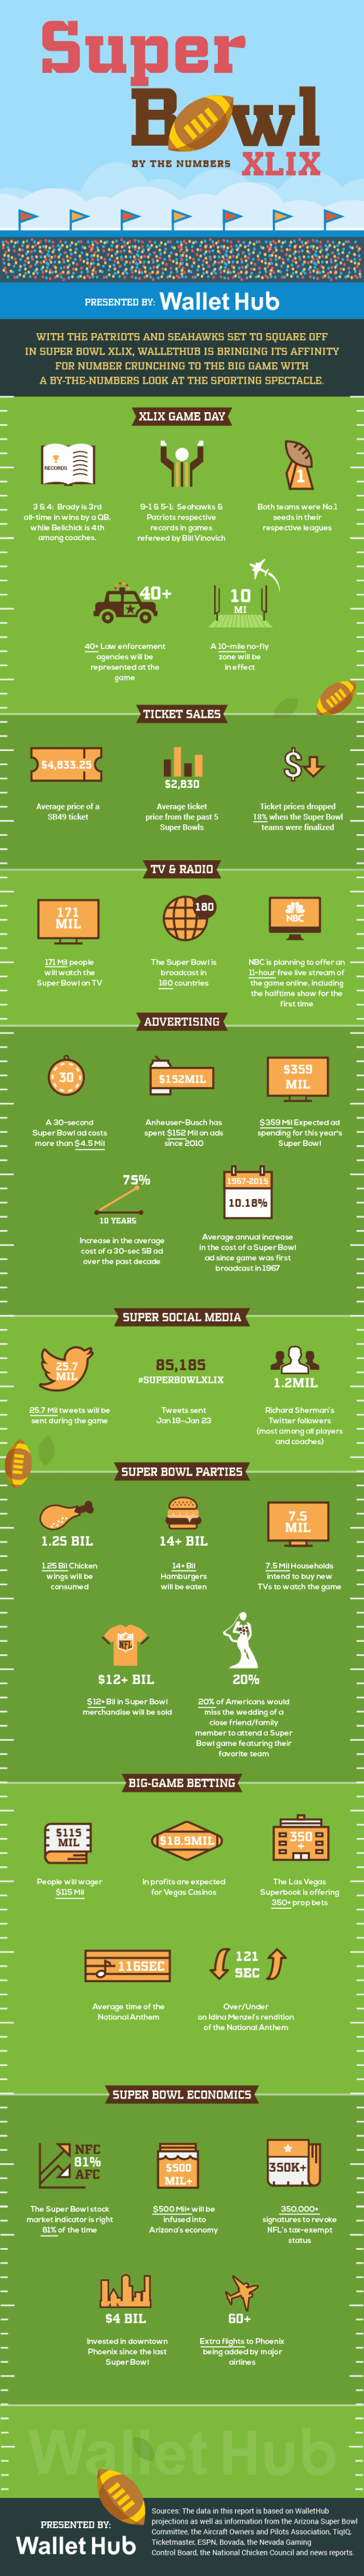 Super Bowl XLIX By The Numbers Infographic